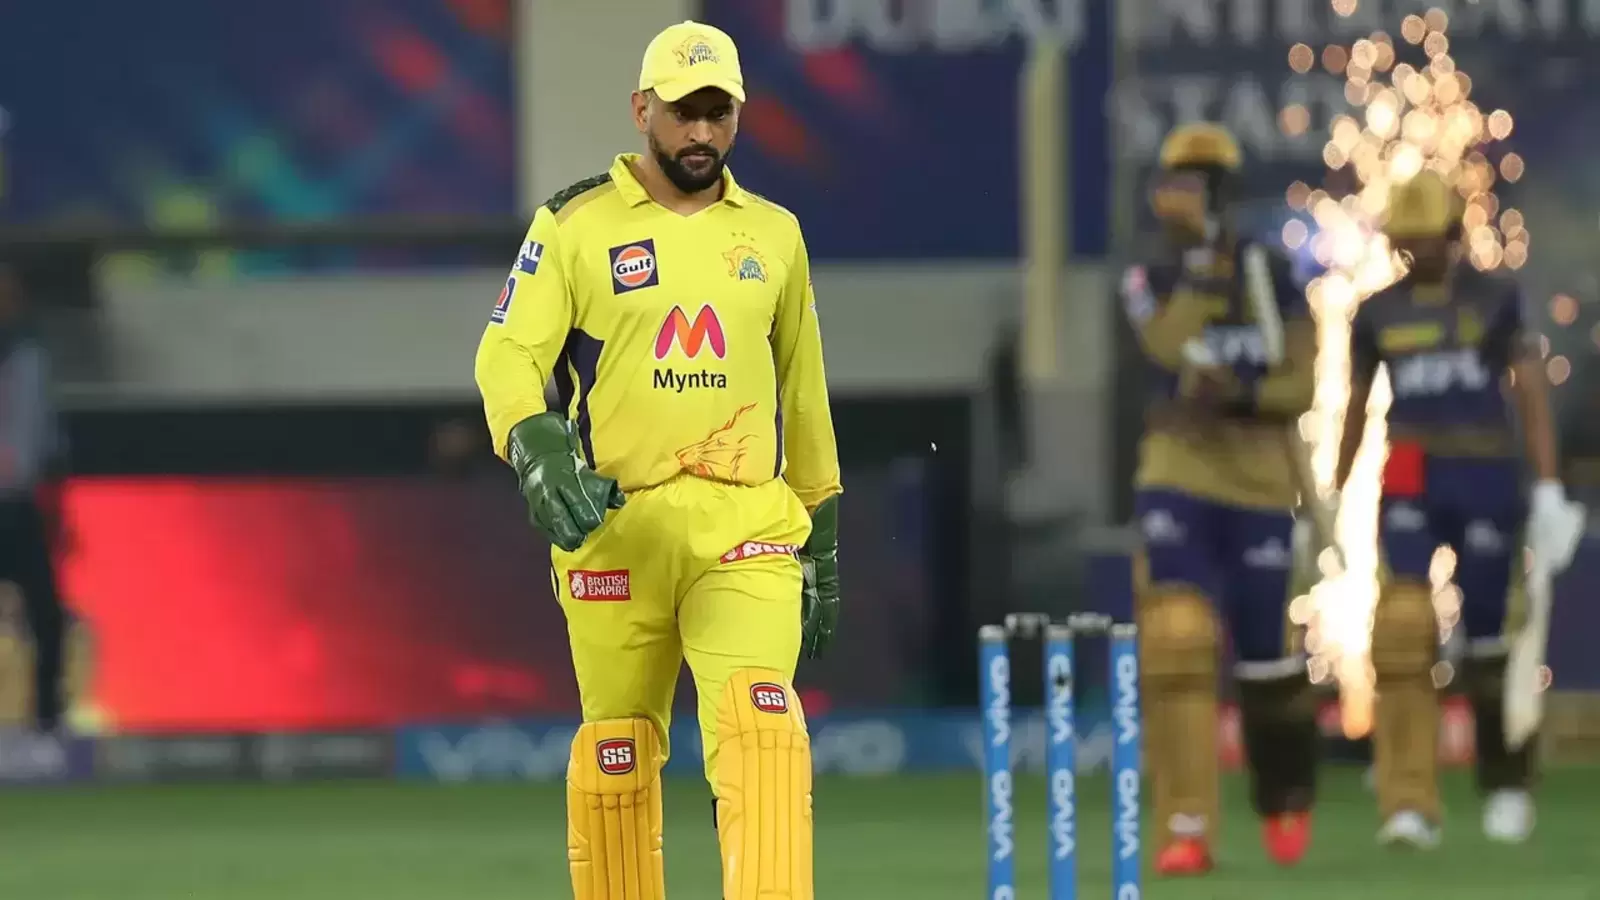 Dhoni walking to the crease during an ipl game